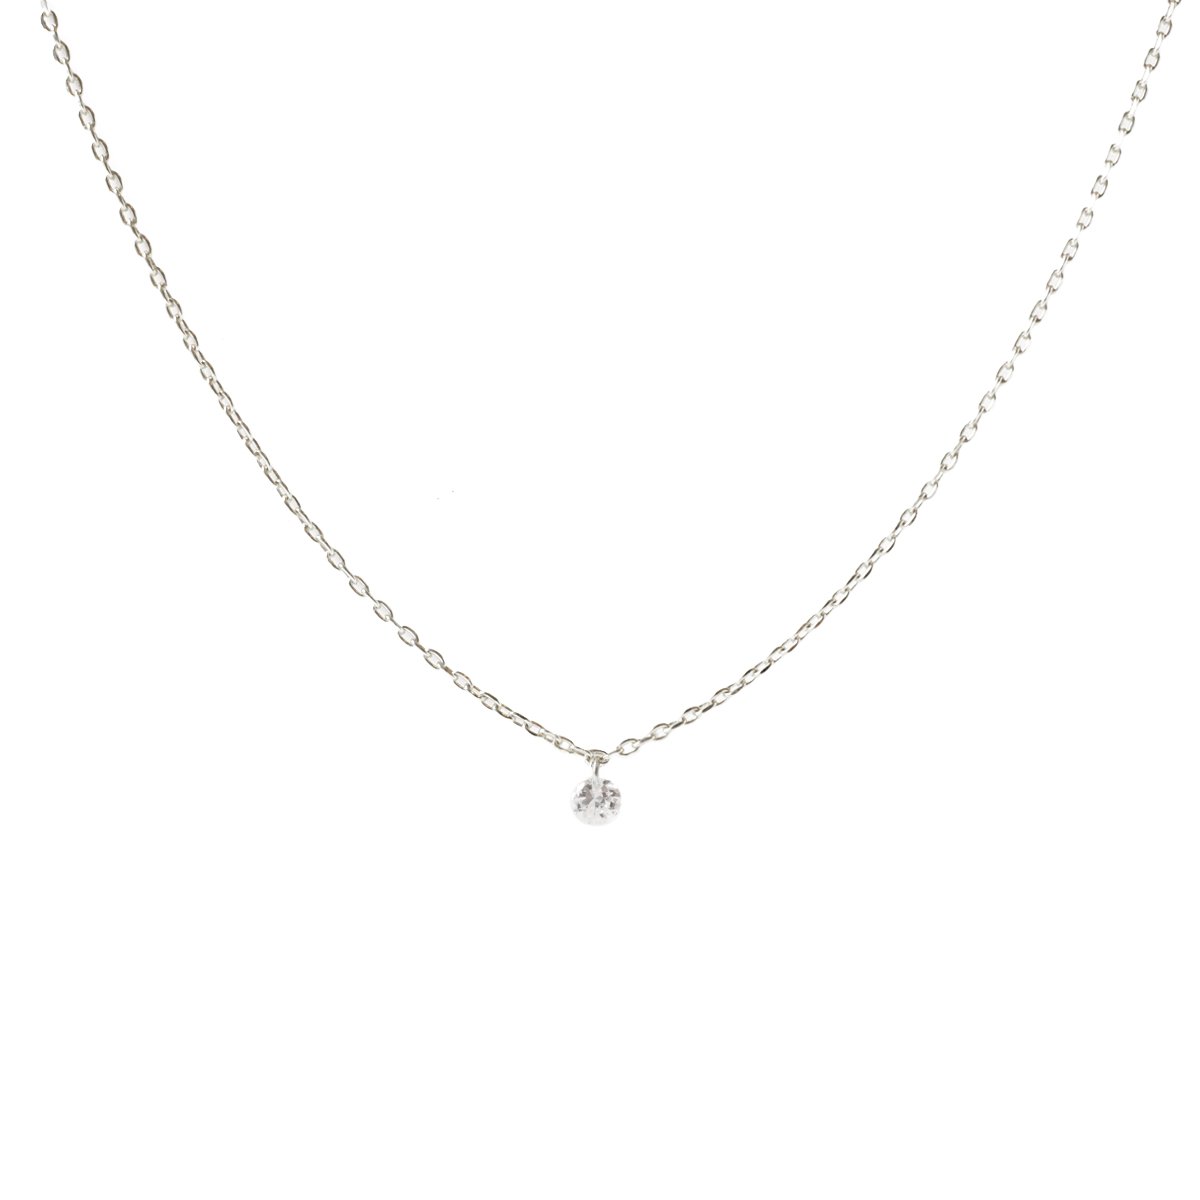 DAINTY RADIANT SOLITAIRE NECKLACE - CUBIC ZIRCONIA & SILVER - SO PRETTY CARA COTTER